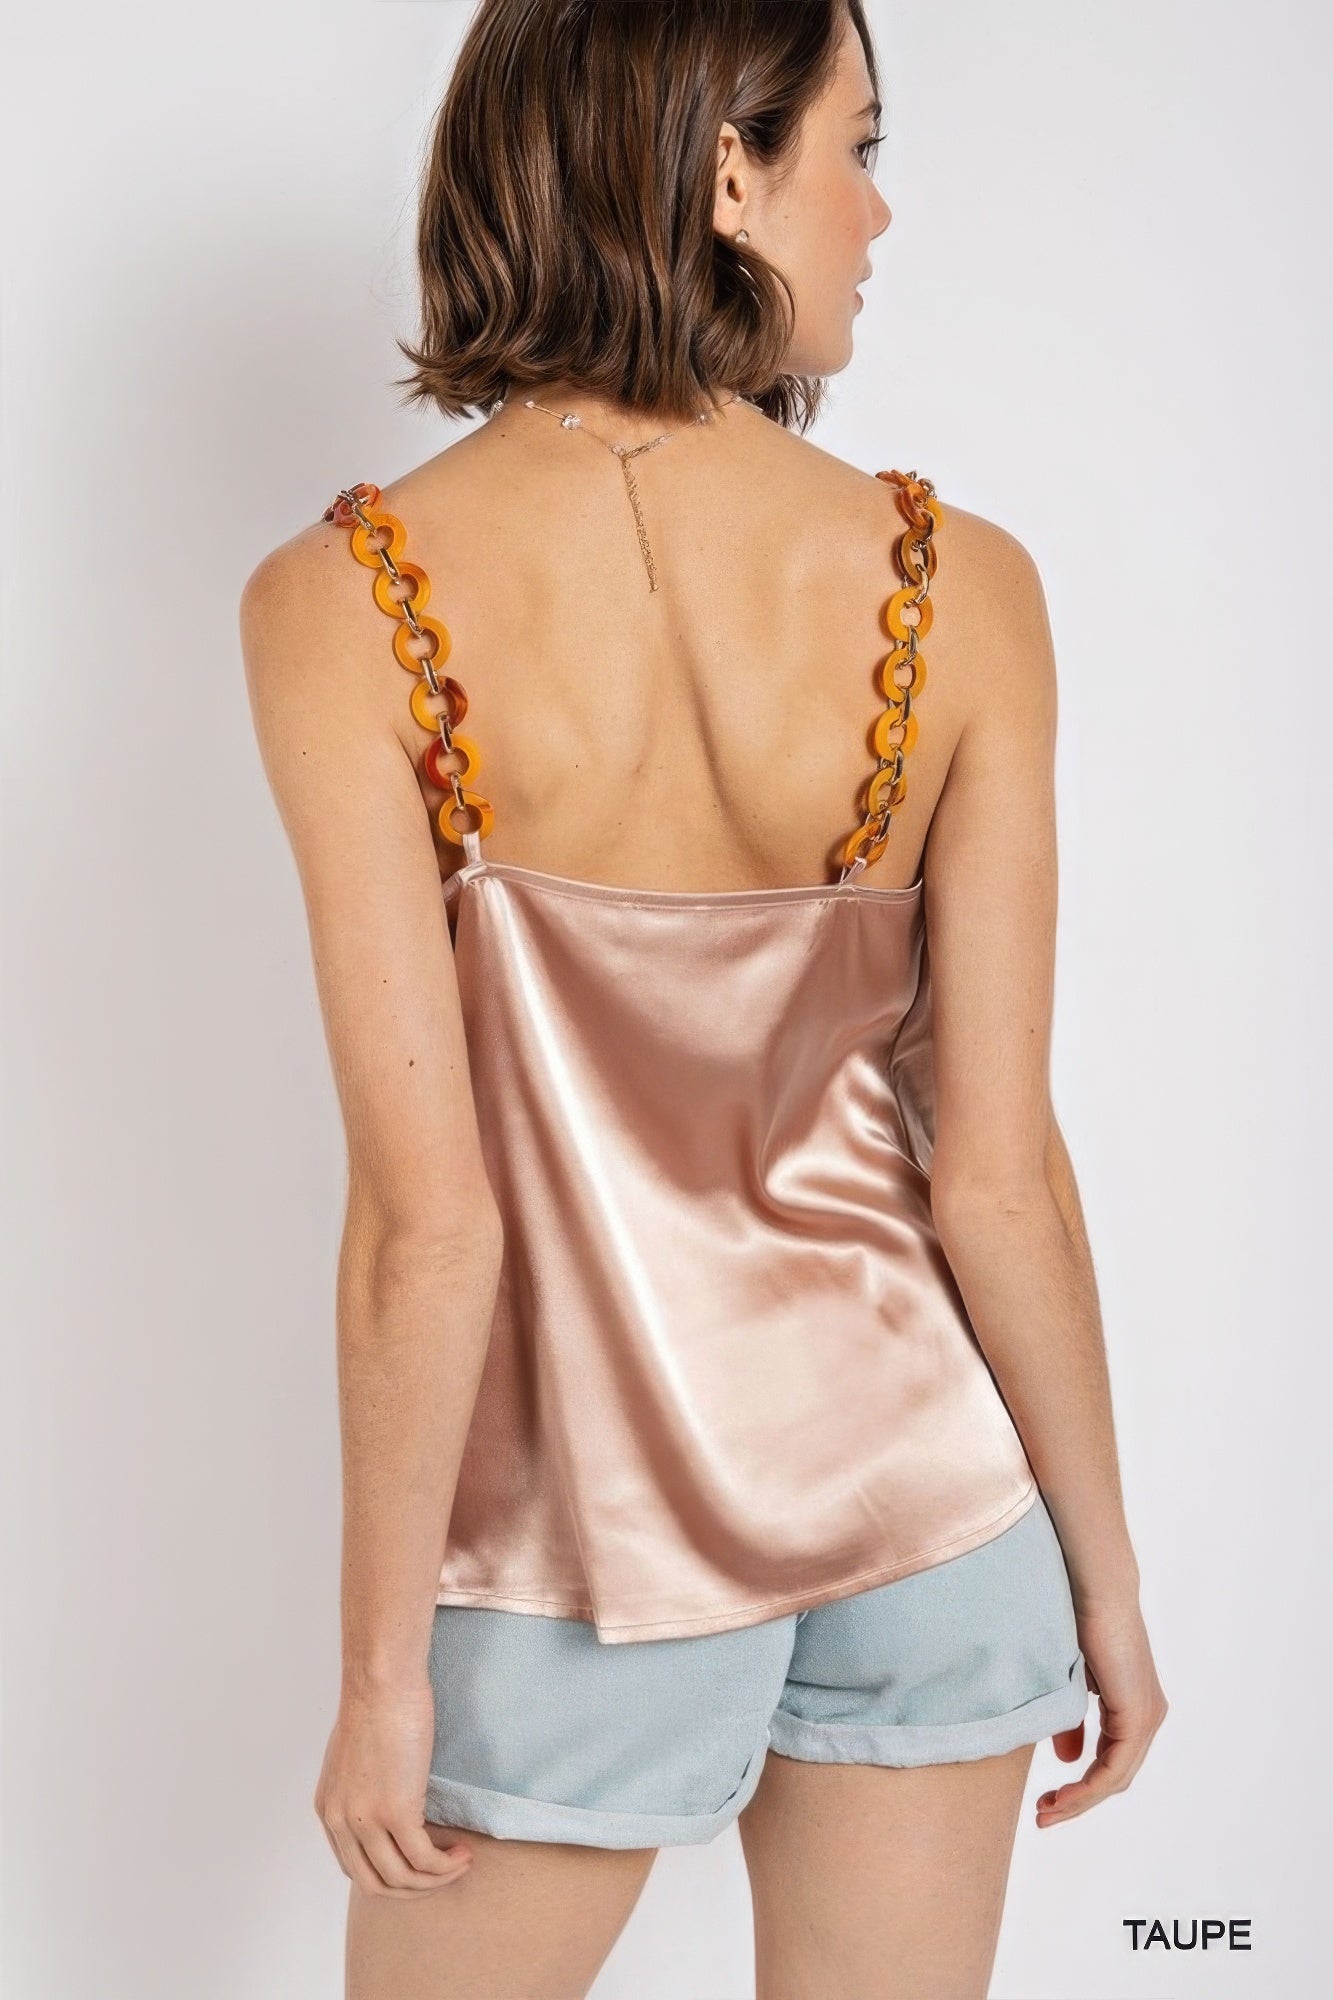 THE ELYSE Cowl neck satin camisole with chain strap